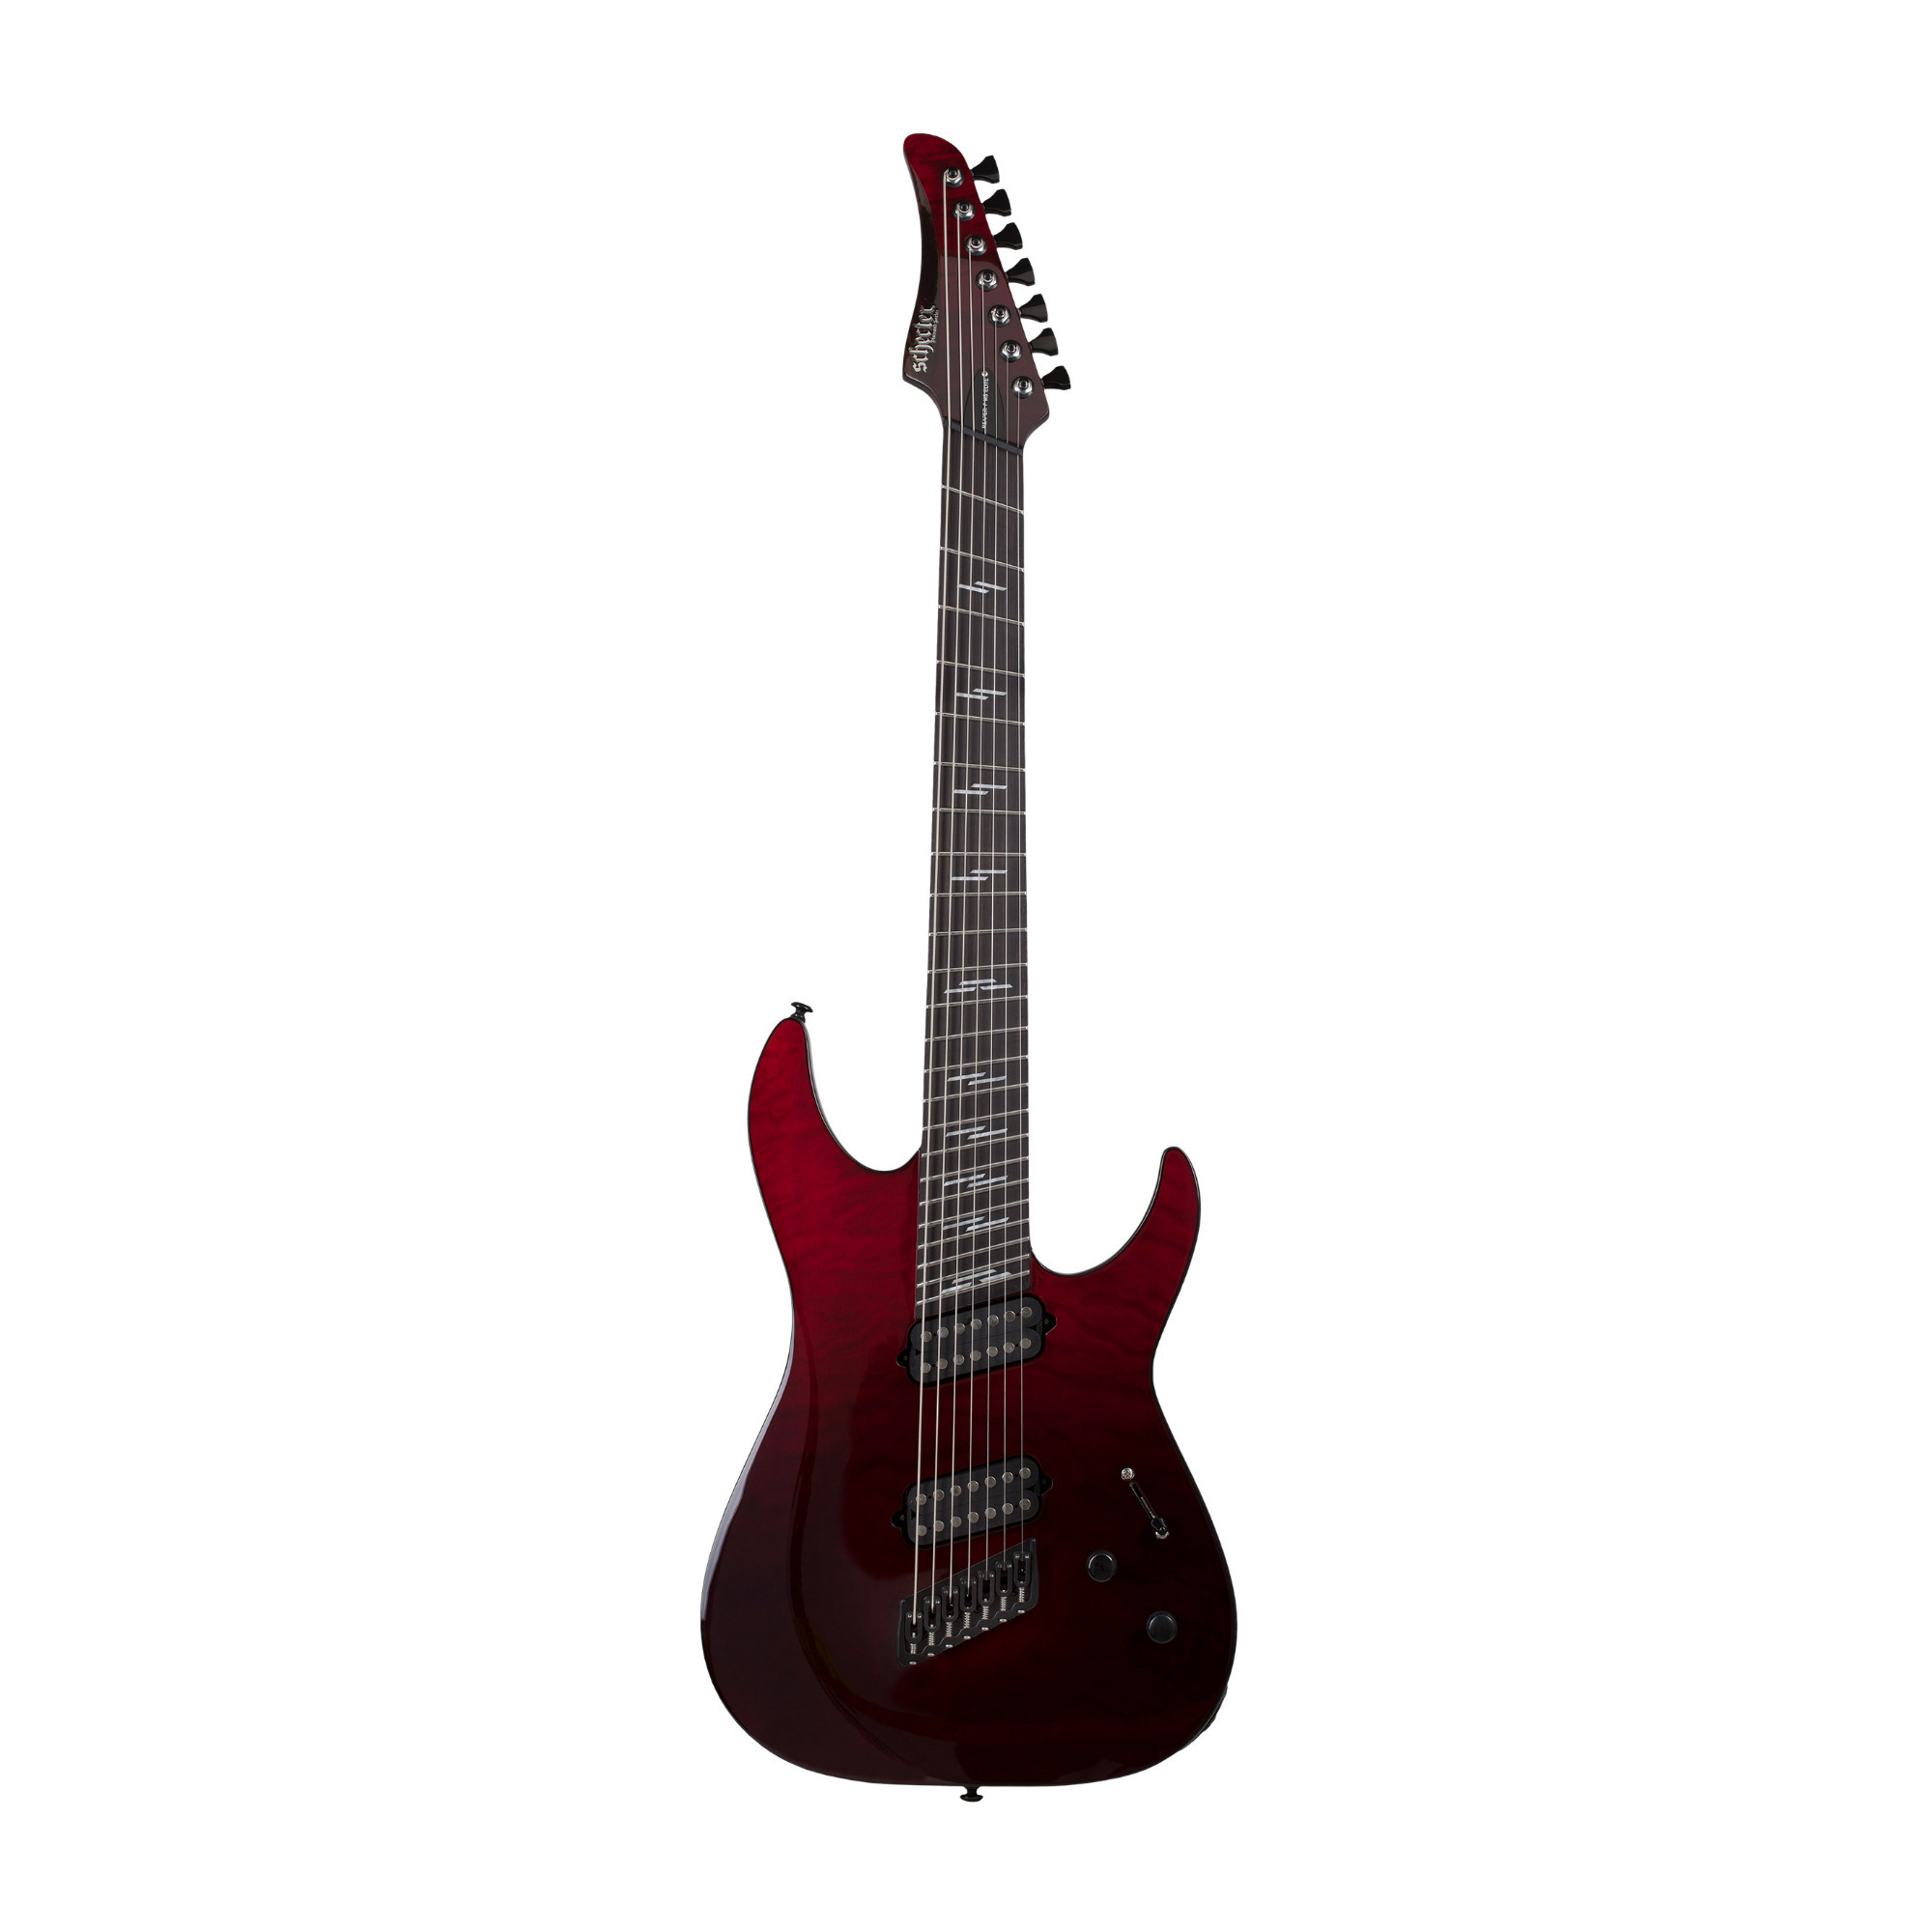 Schecter Reaper-7 Multiscale 7-String Electric Guitar (Right-Handed, Blood Burst) in Red -  SGR-2182